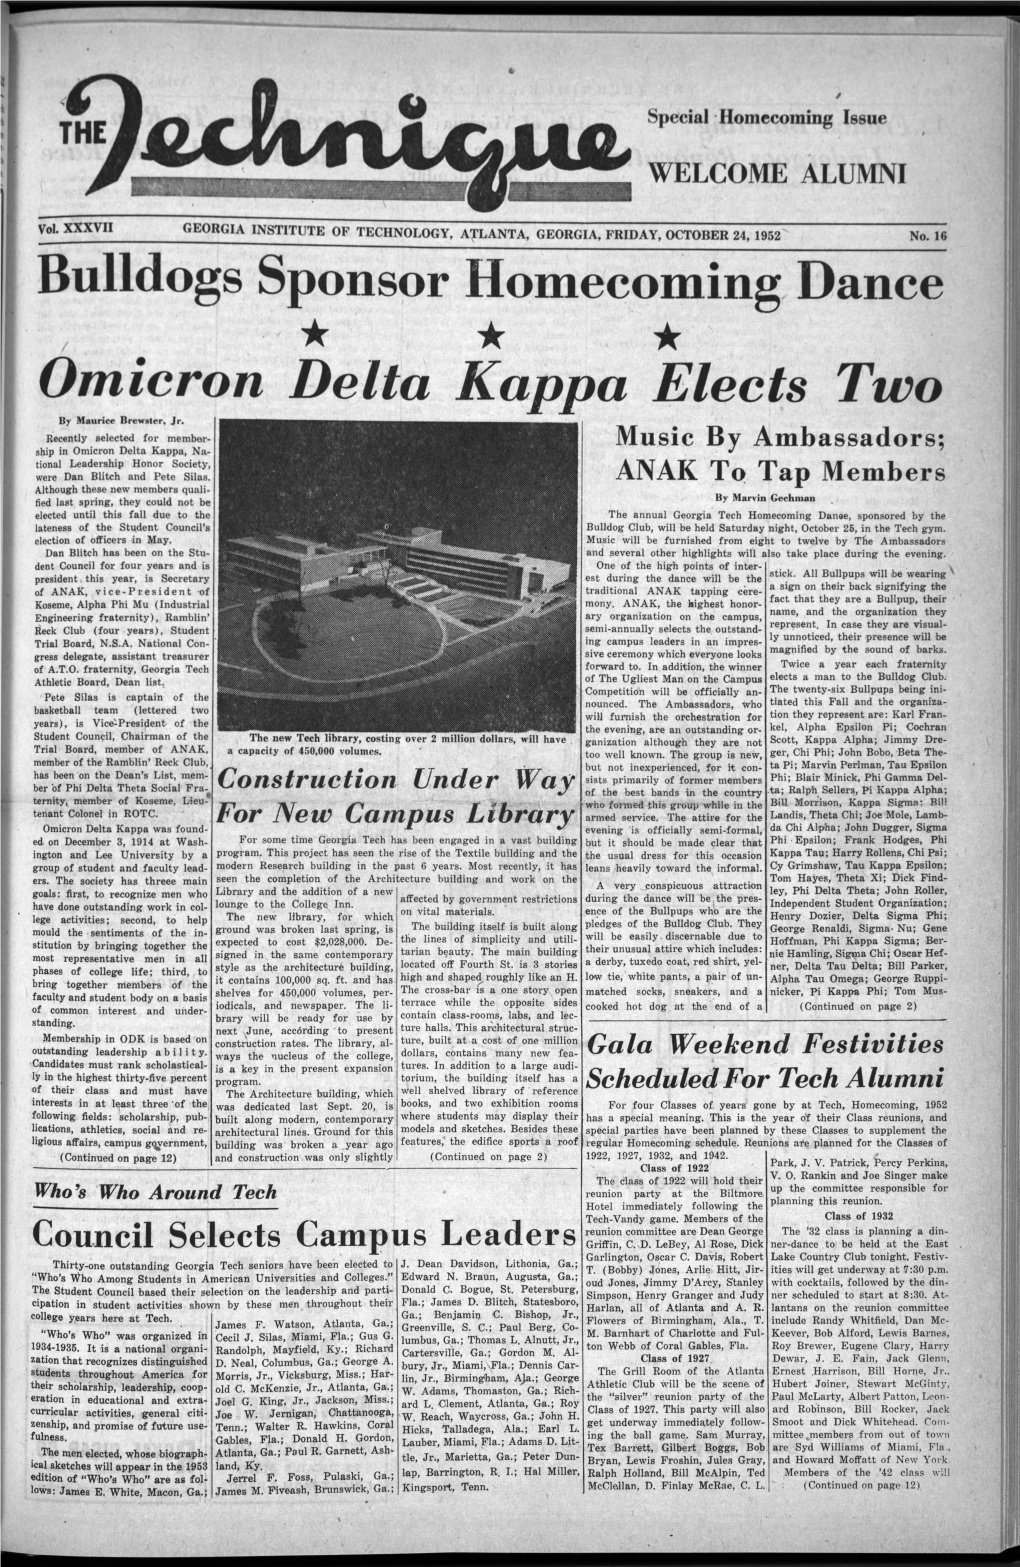 Bulldogs Sponsor Homecoming Dance Omicron Delta Kappa Elects Two by Maurice Brewster, Jr